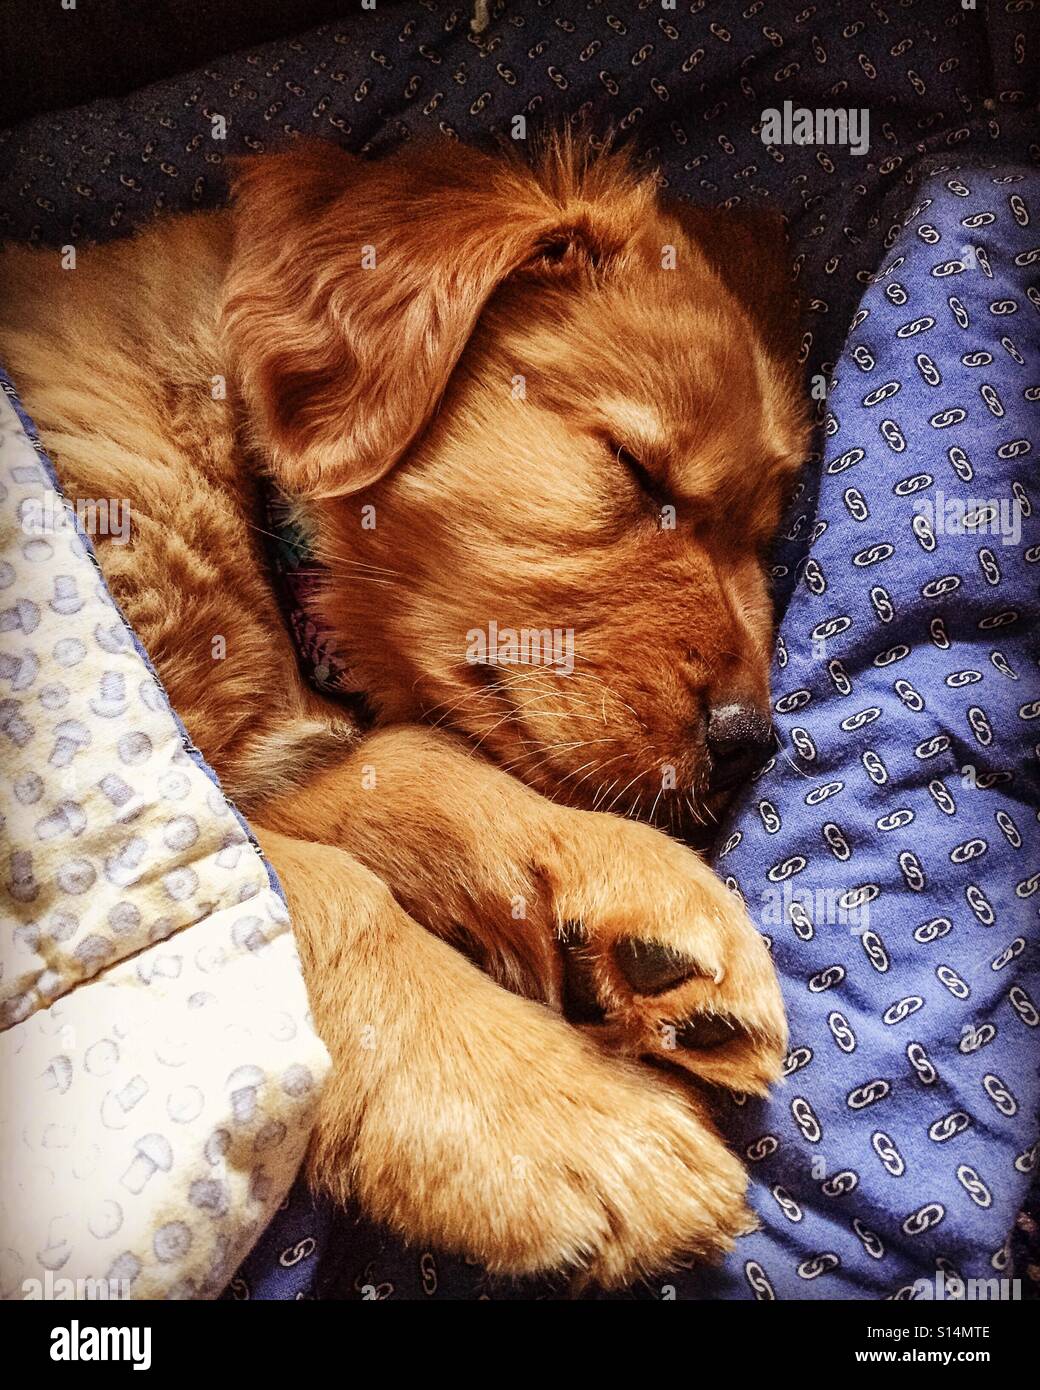 New puppy, tired puppy Stock Photo